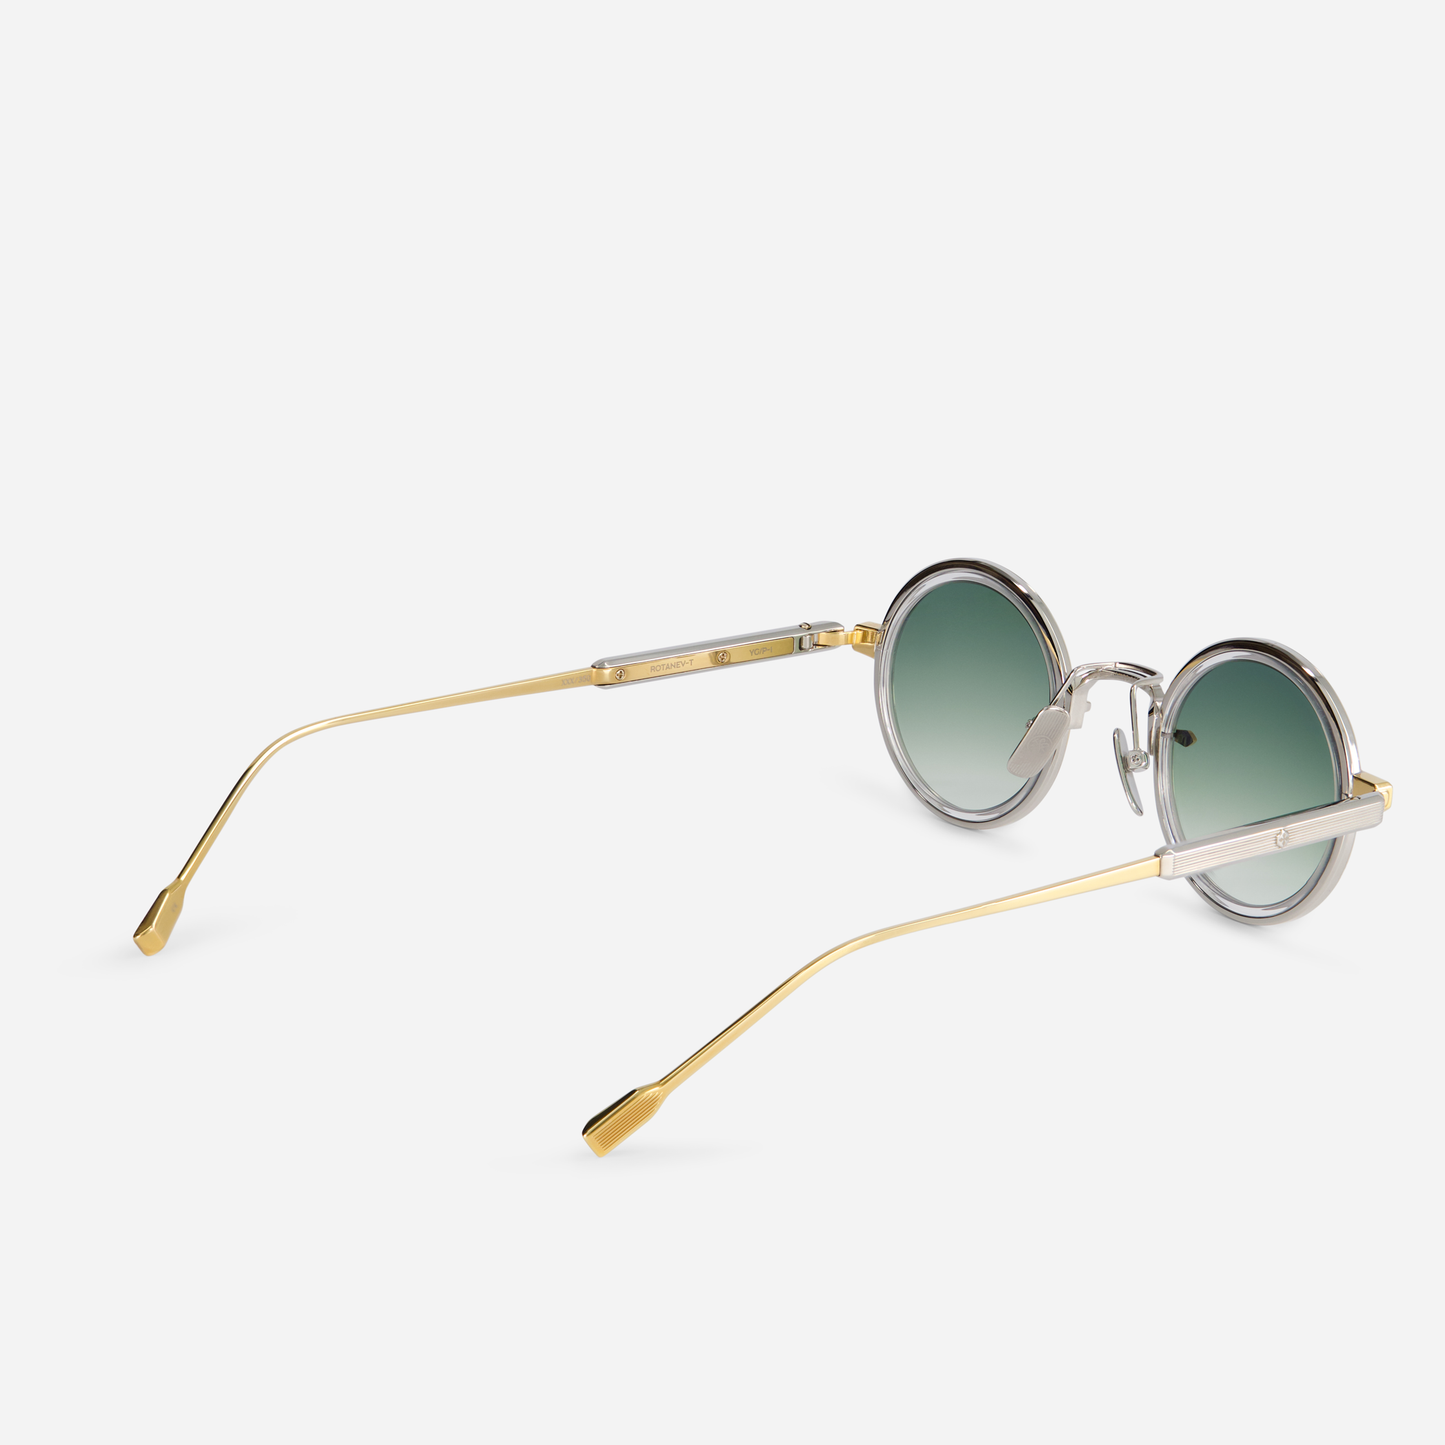 This eyewear, Rotanev-T YG/P-1, includes a titanium frame with yellow gold and platinum coatings, a crystal takiron rim insert, and gradient green lenses.